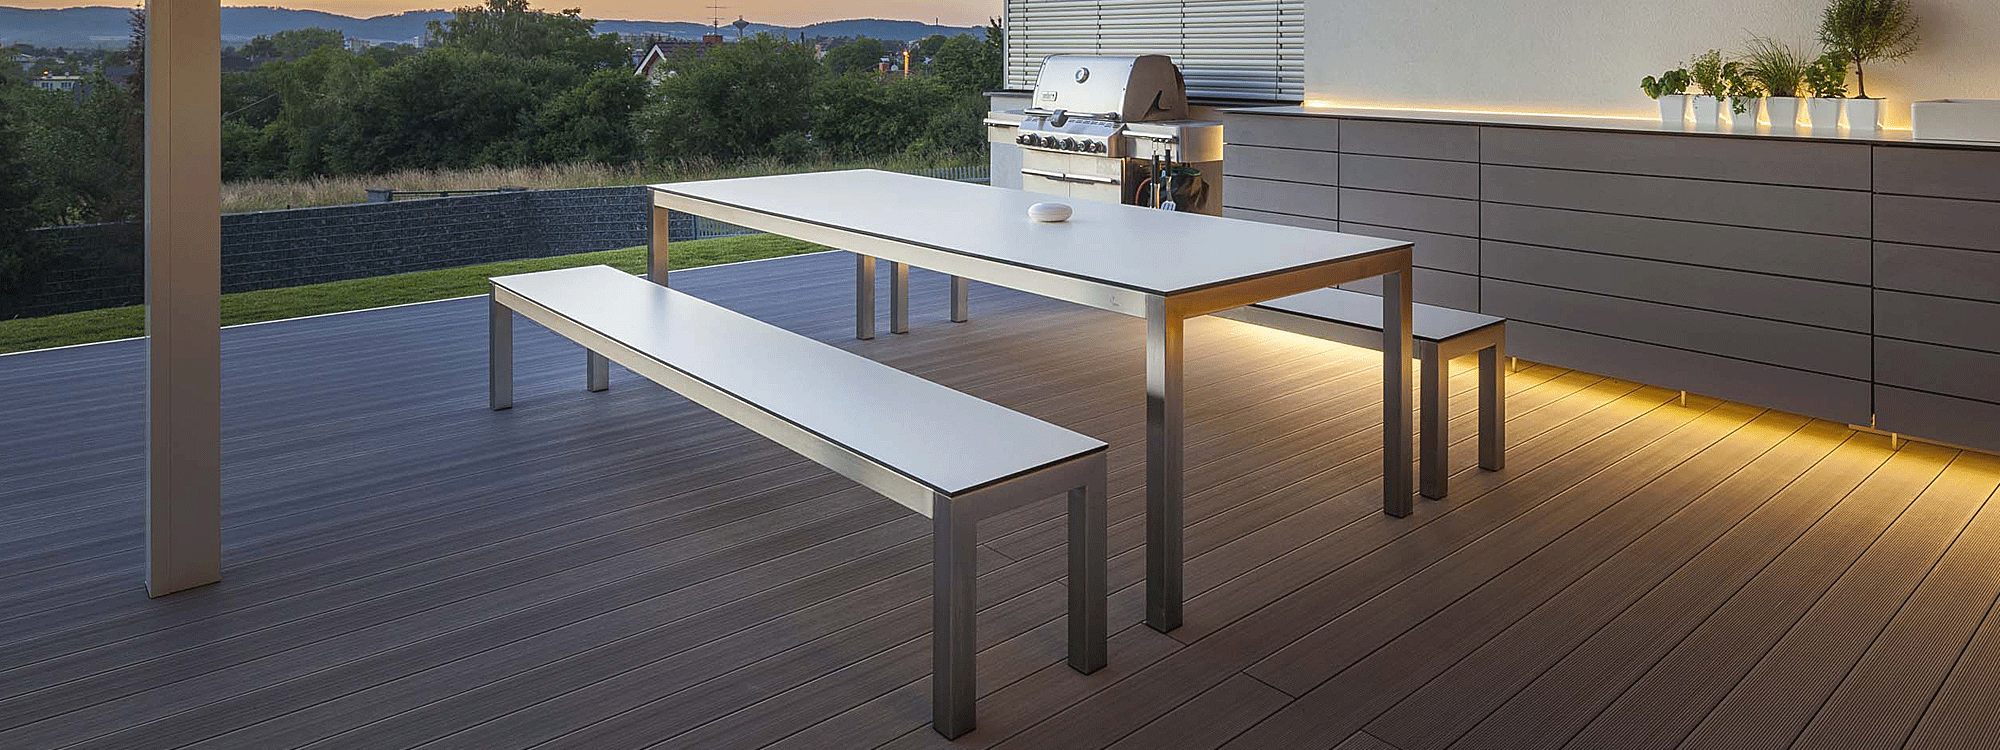 Leuven garden table bench set is a range of contemporary outdoor dining furniture by Todus garden furniture company